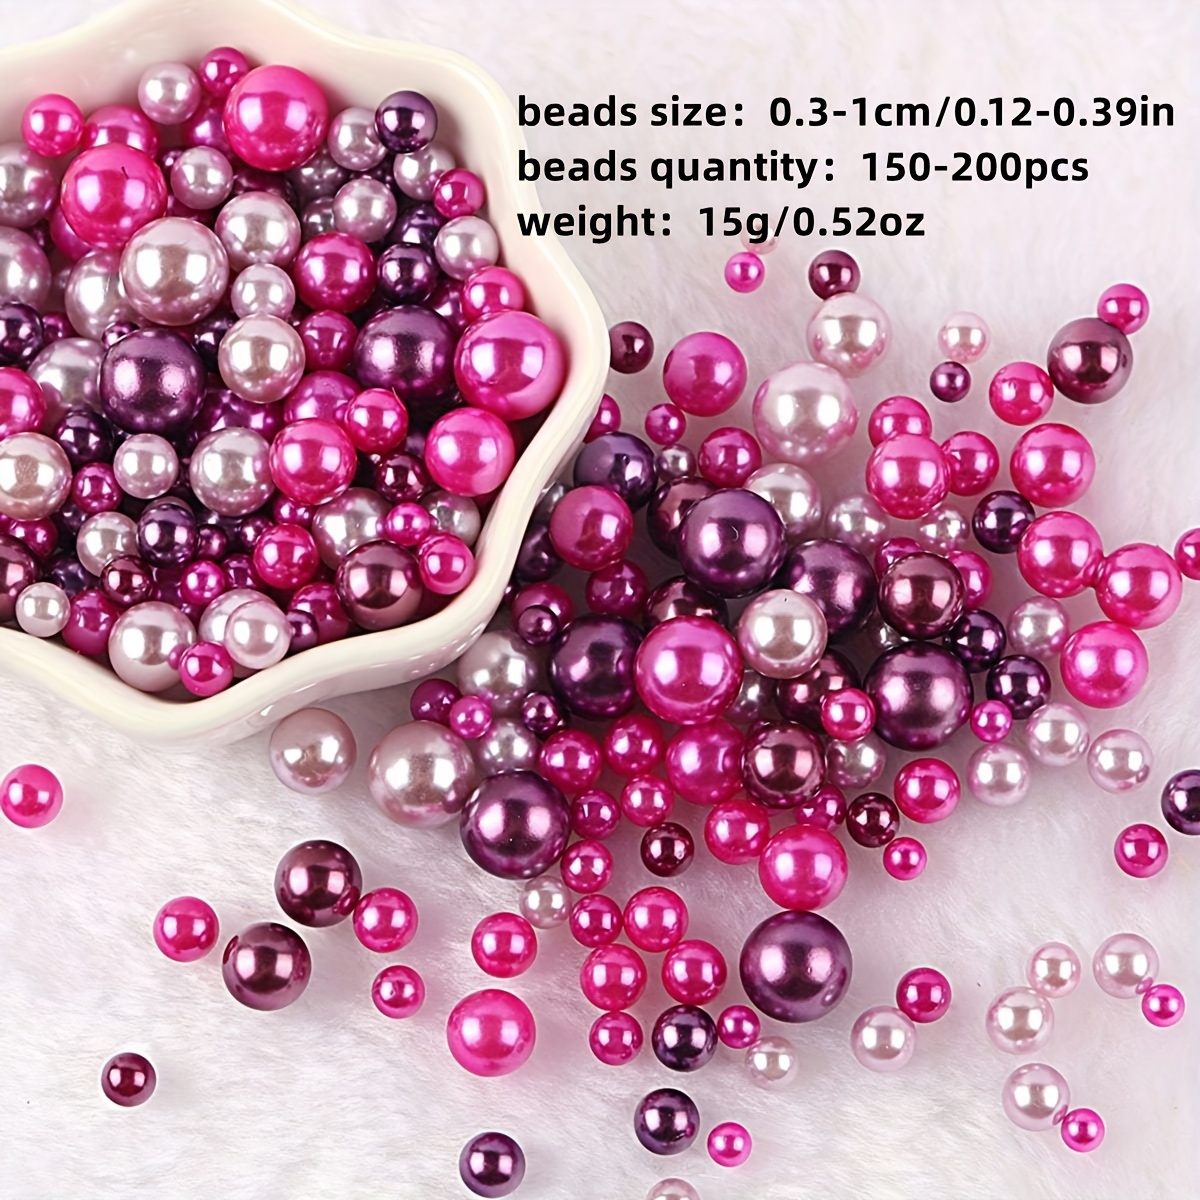 Assorted Mix of Beaded Glass Charms- Pink & Purple Mix